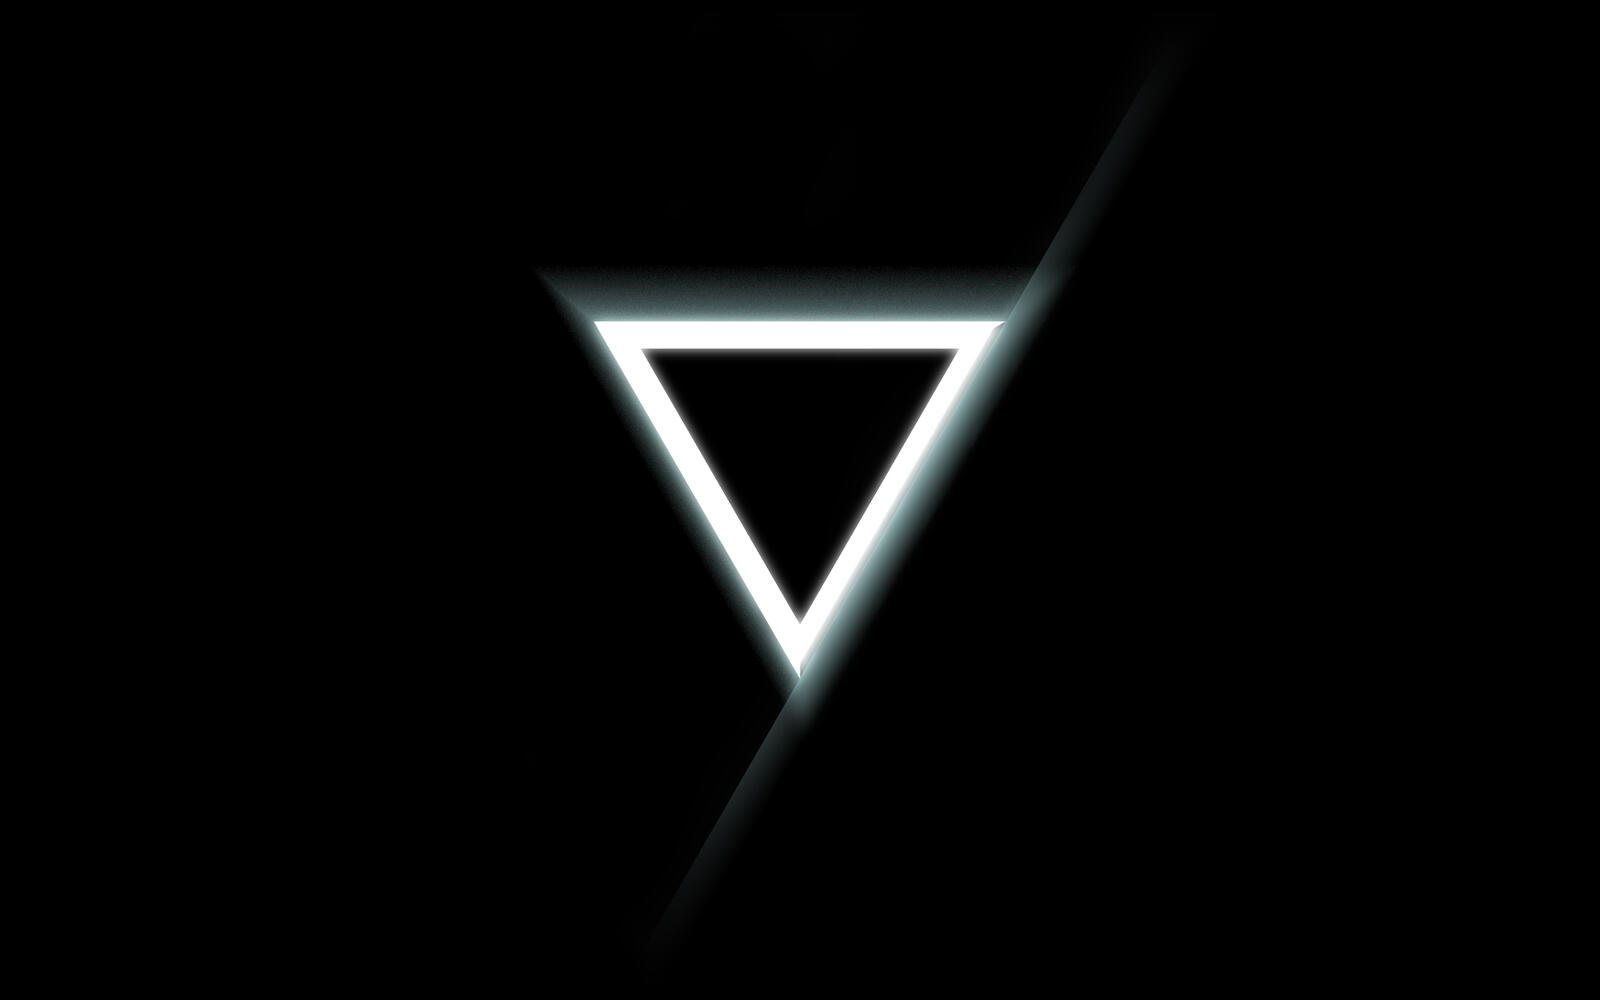 Wallpapers background black triangle on the desktop